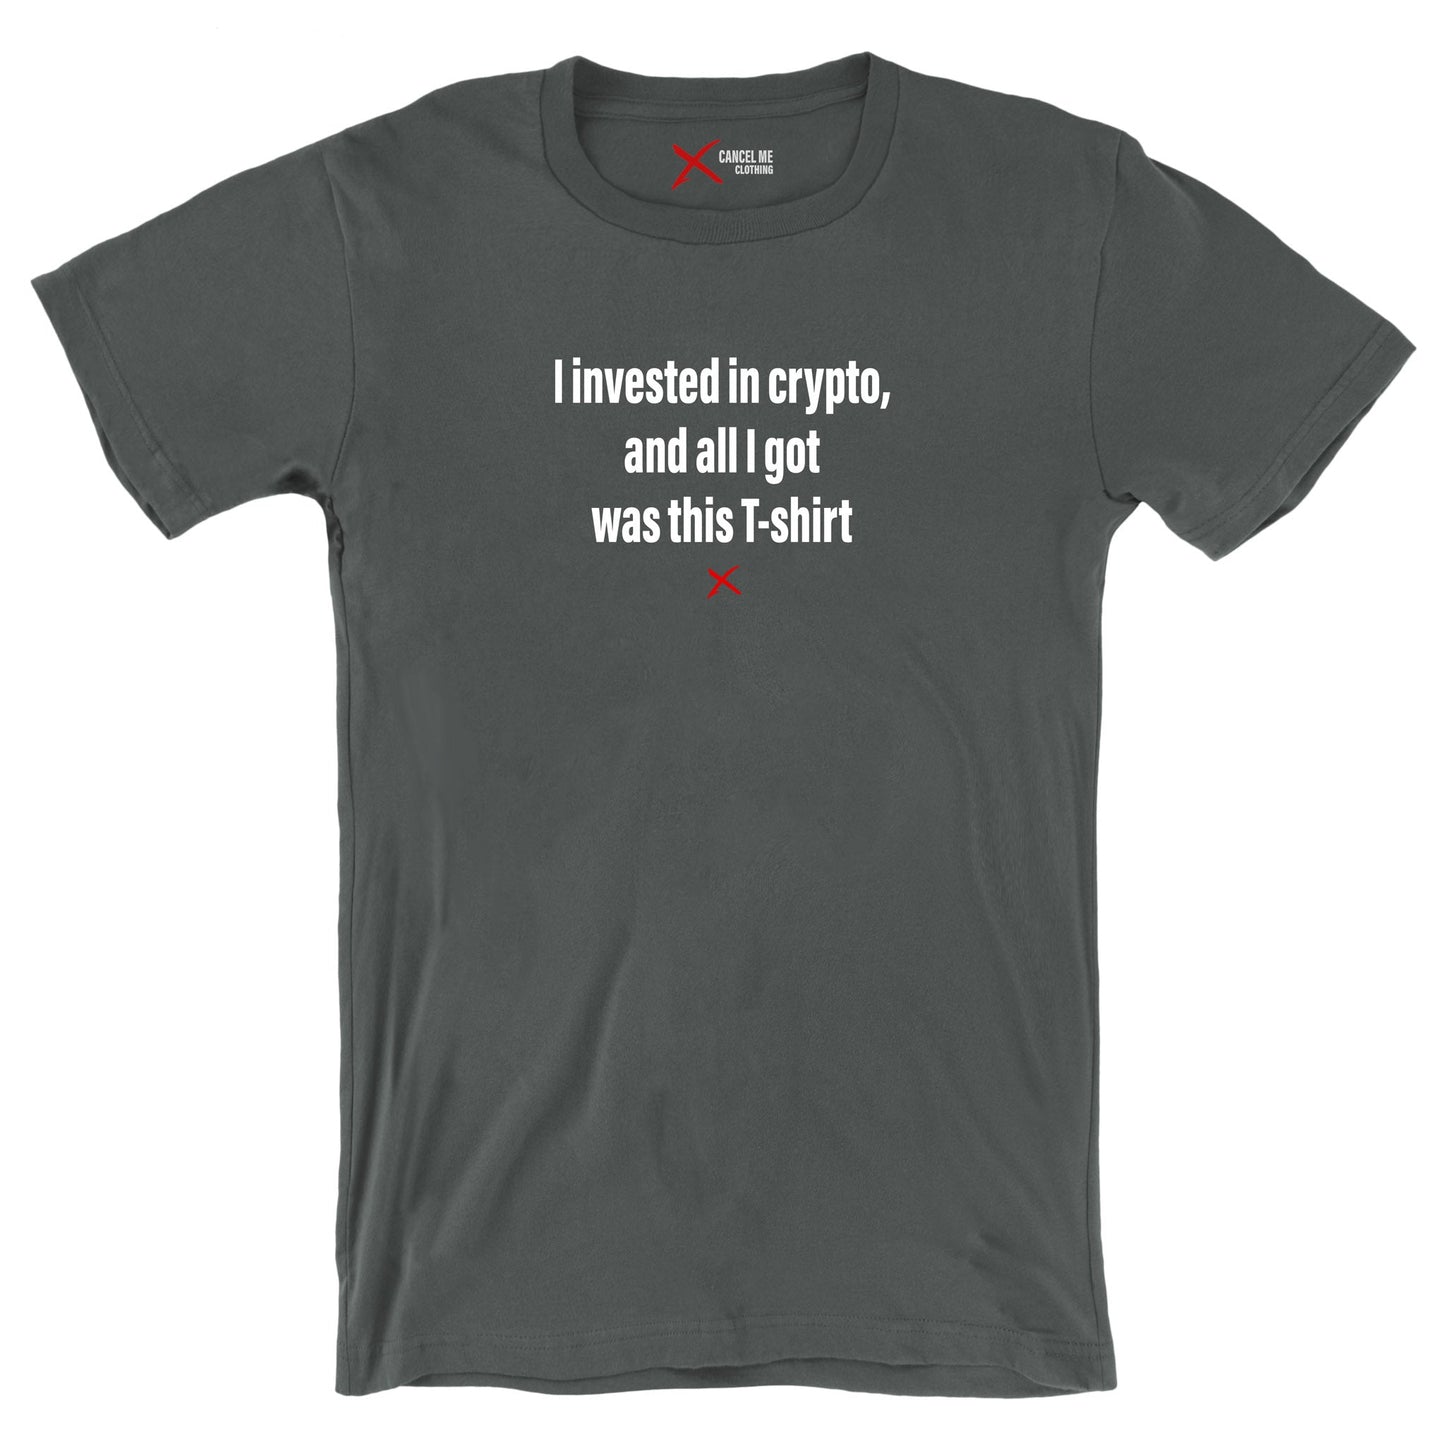 I invested in crypto, and all I got was this T-shirt - Shirt